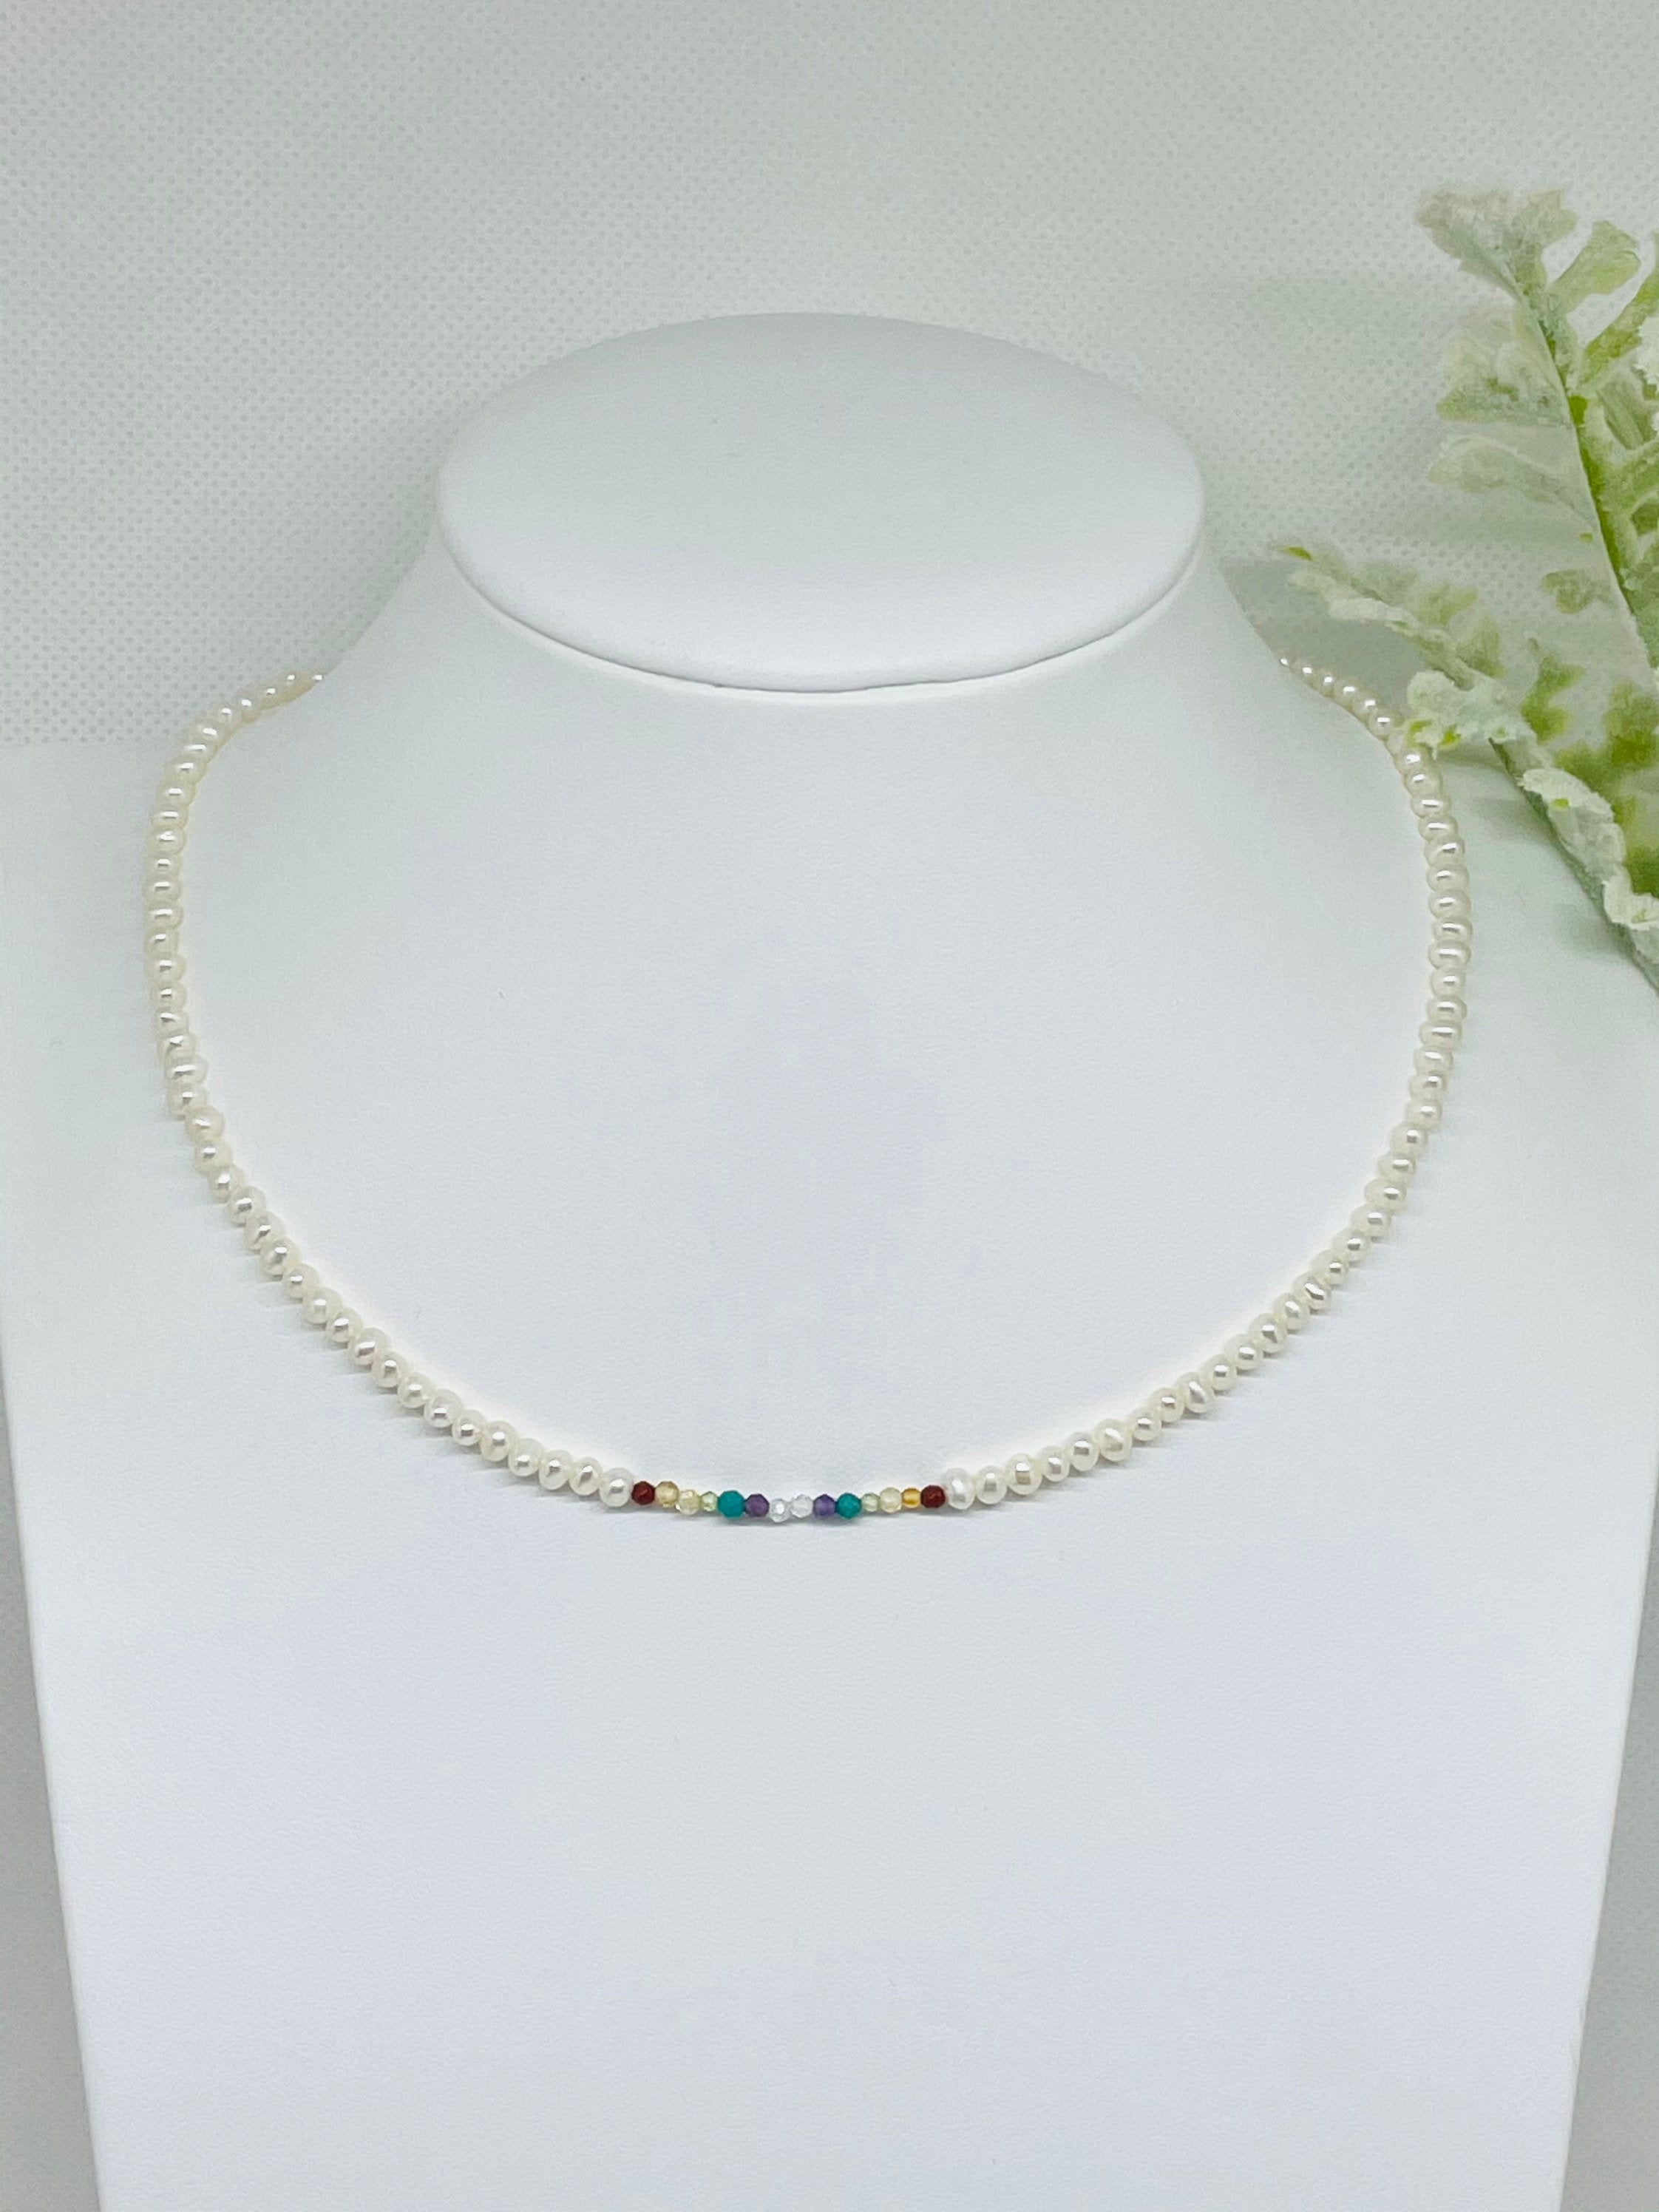 Pearl Choker Necklace with 7 Chakra Beads